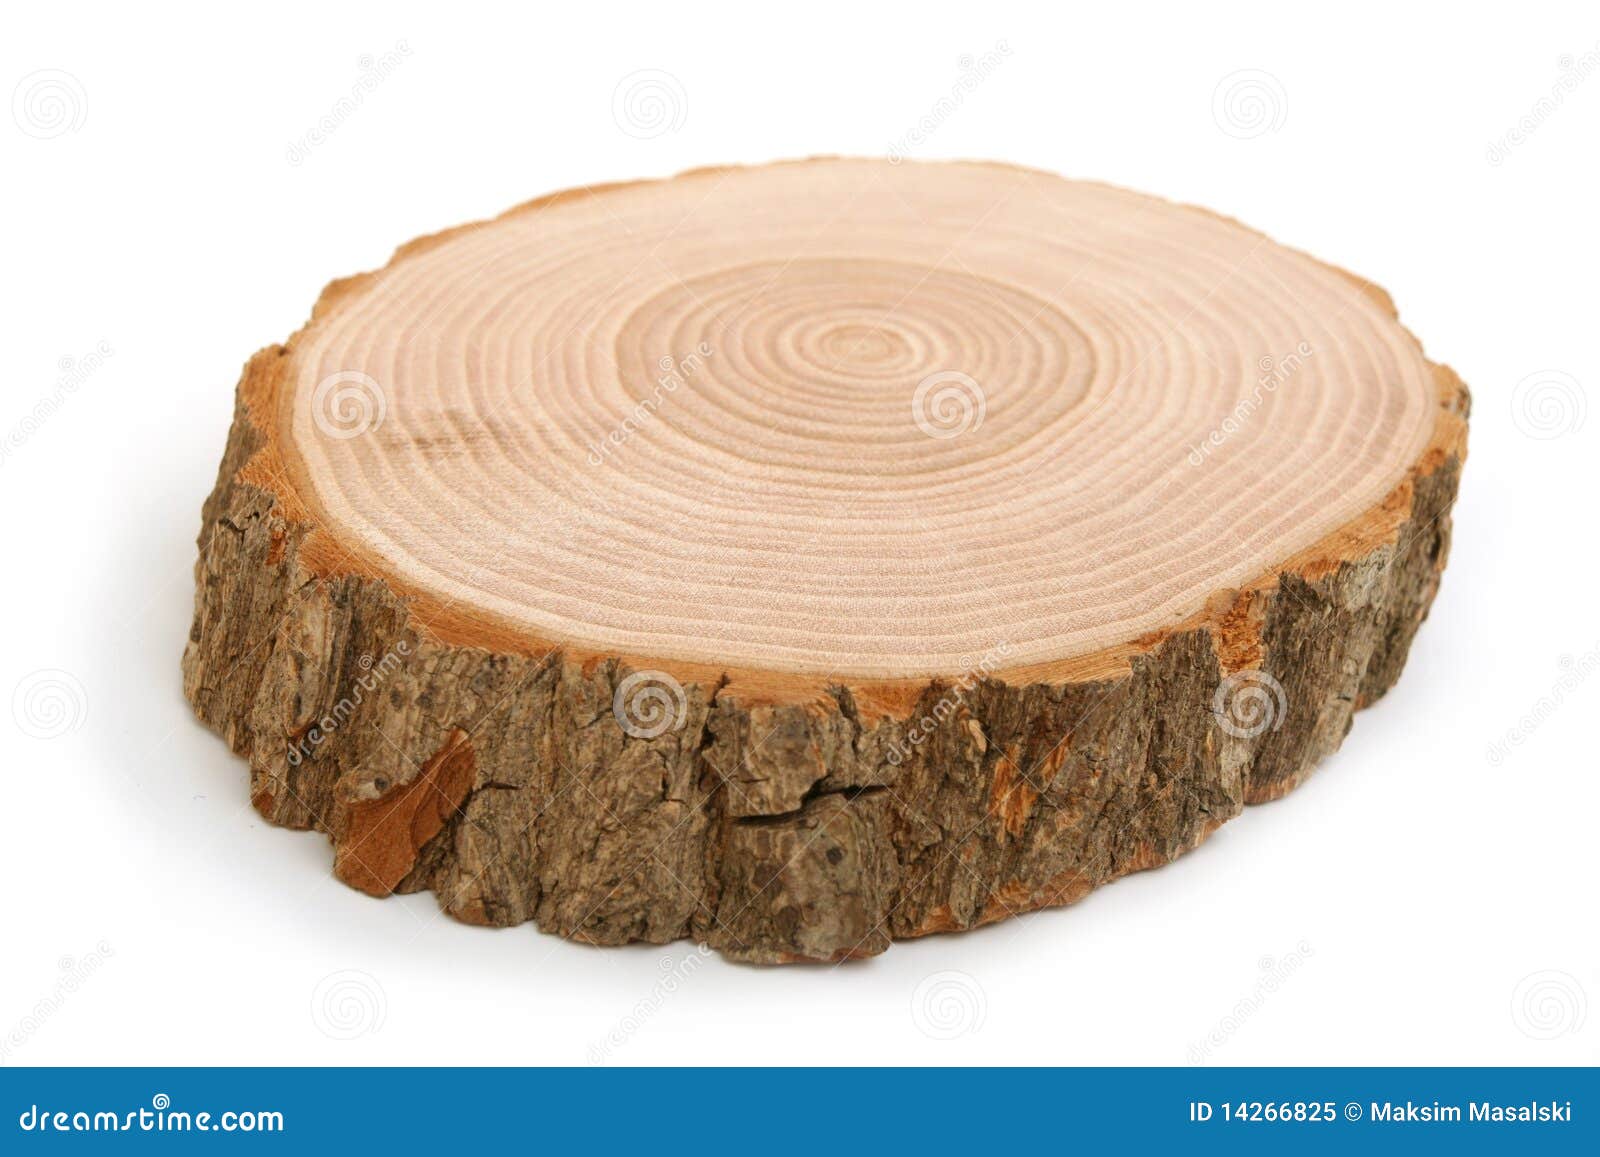 KREA - close up annual rings tree trunk cross section texture high detail  high definition photorealistic 8k